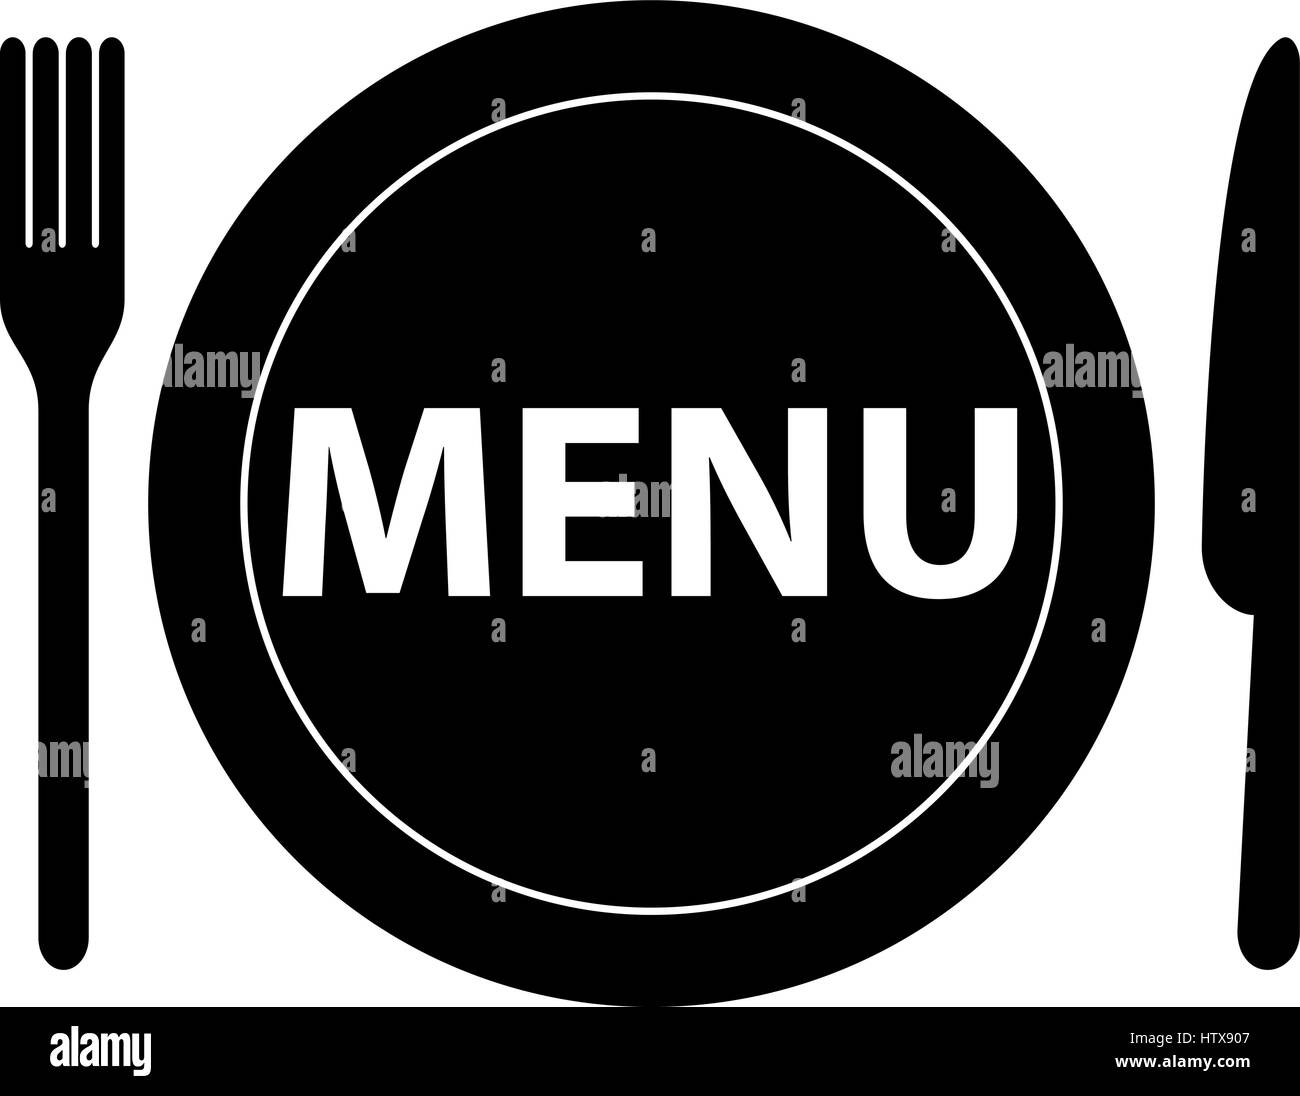 Kitchen icon of dish, fork and knife. Menu icon flat. Stock Vector